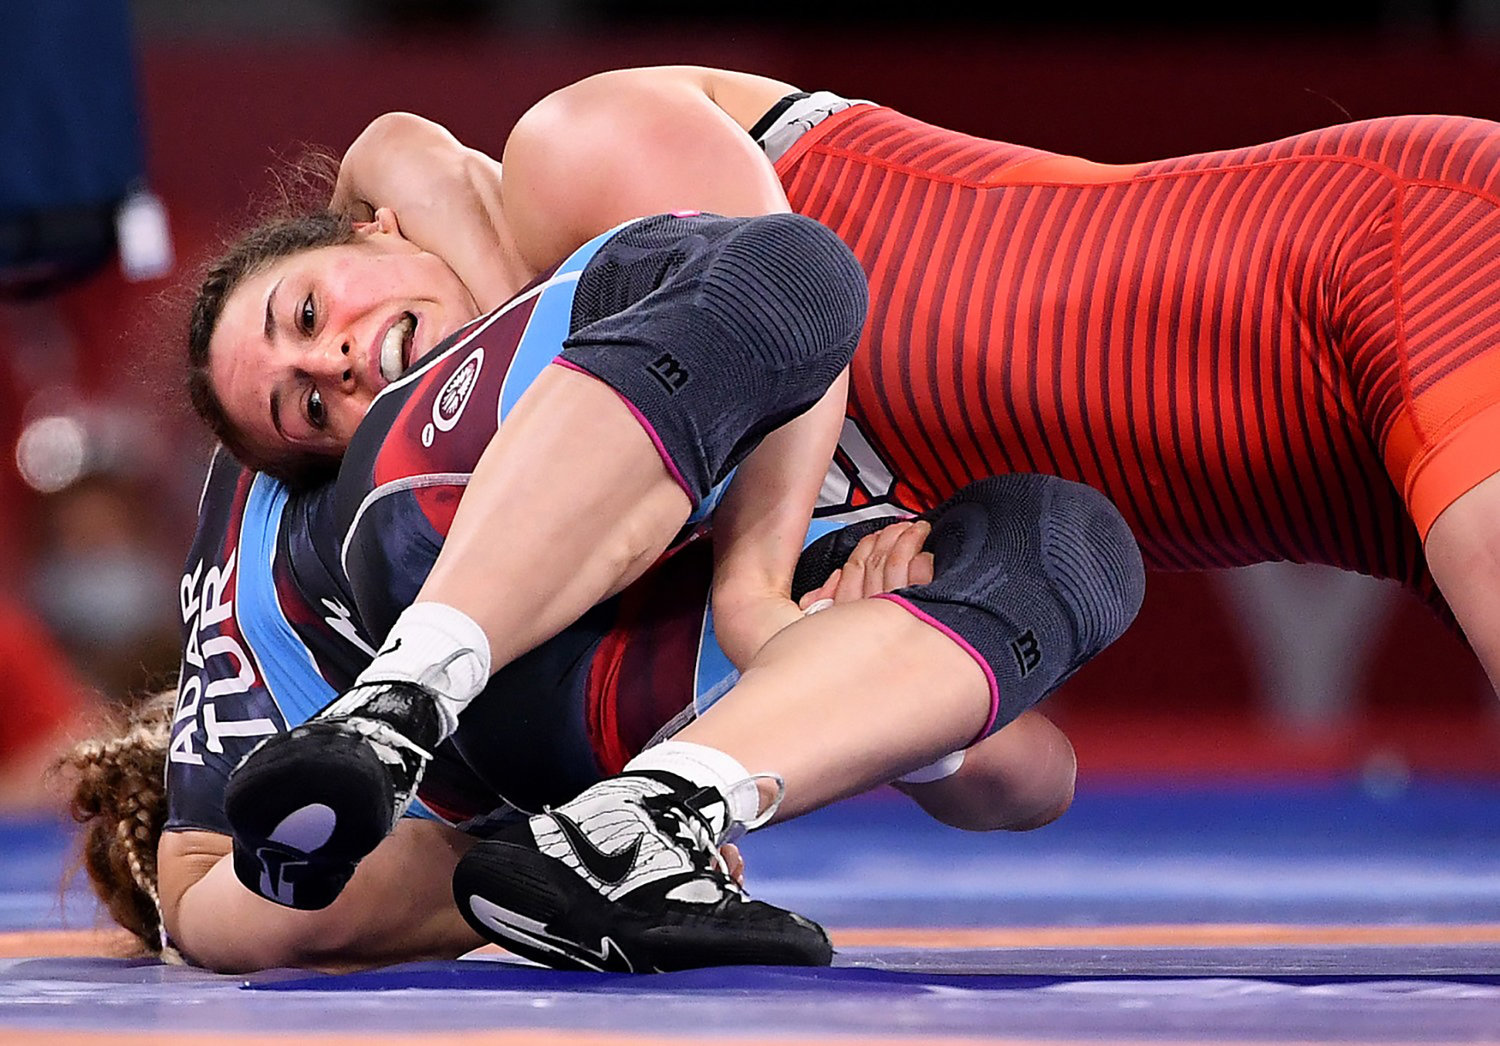 USA's Adeline Gray competes with Turkey's Yasemin Adar in the women's 76kg wrestling at the 2020 Tokyo Olympics.